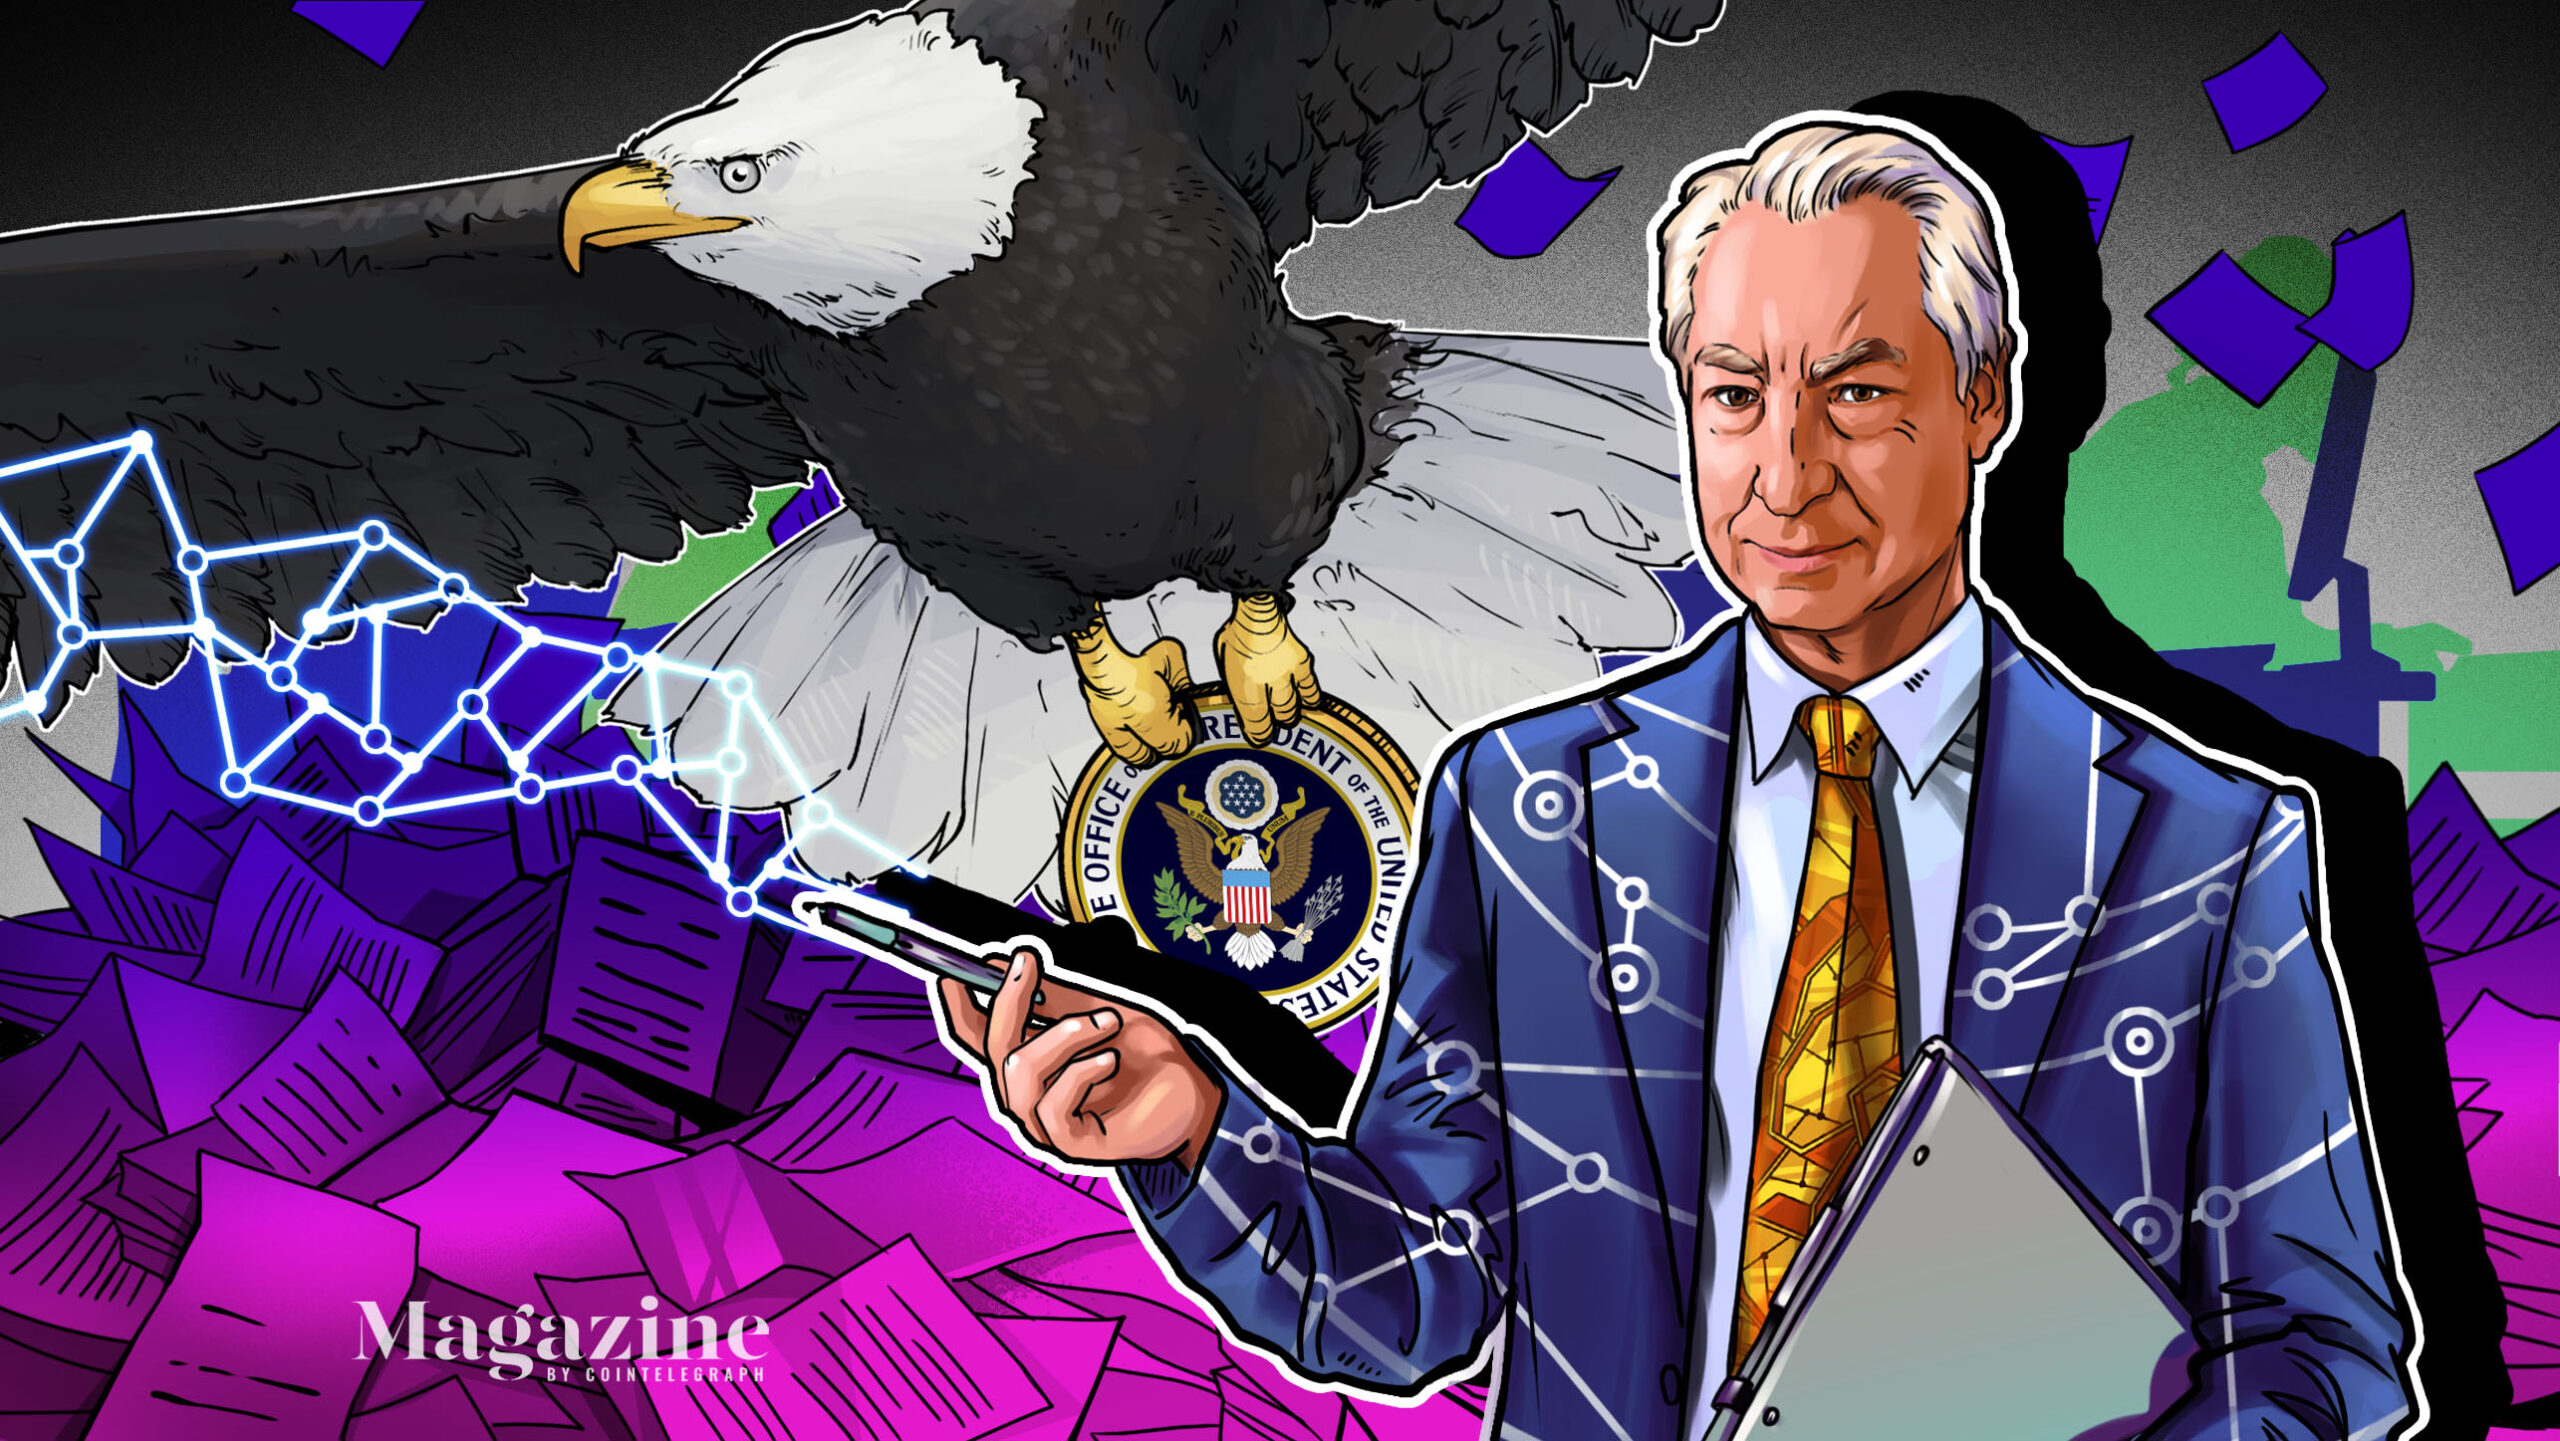 Powers-on…-biden-accepts-blockchain-technology,-recognizes-its-benefits-and-pushes-for-adoption